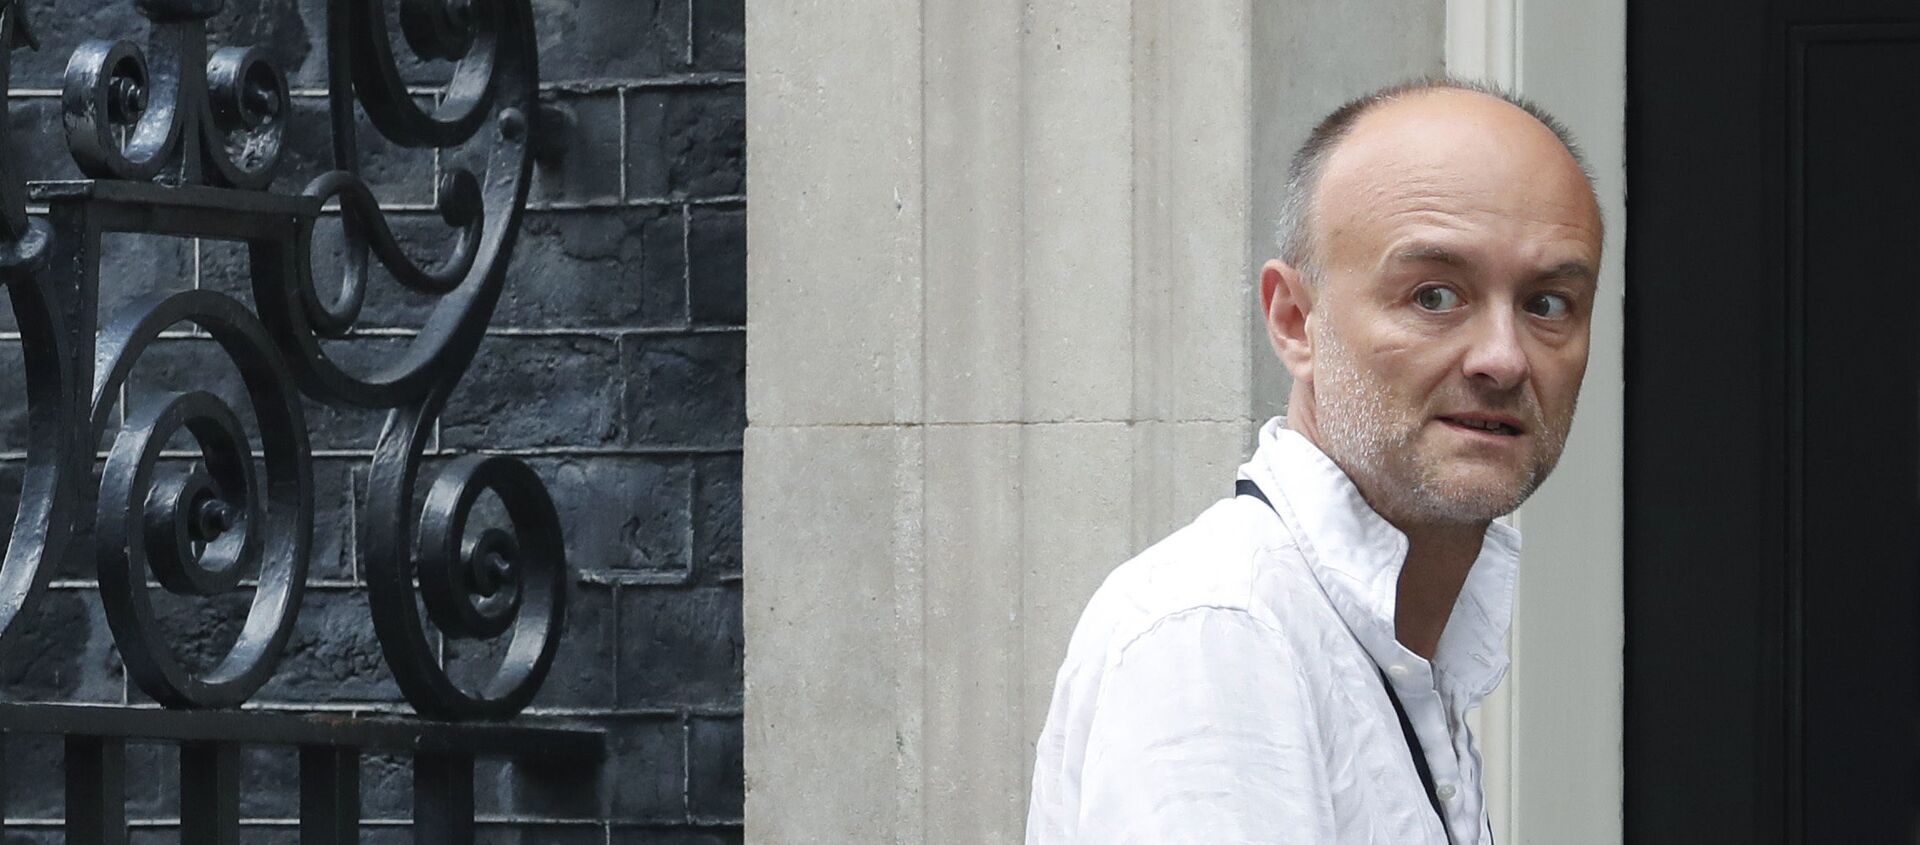 Dominic Cummings, a British political strategist and special adviser to Prime Minister Boris Johnson, slinks into 10 Downing Street in London, Tuesday, 30 July 2019. (AP Photo/Alastair Grant) - Sputnik International, 1920, 15.12.2020